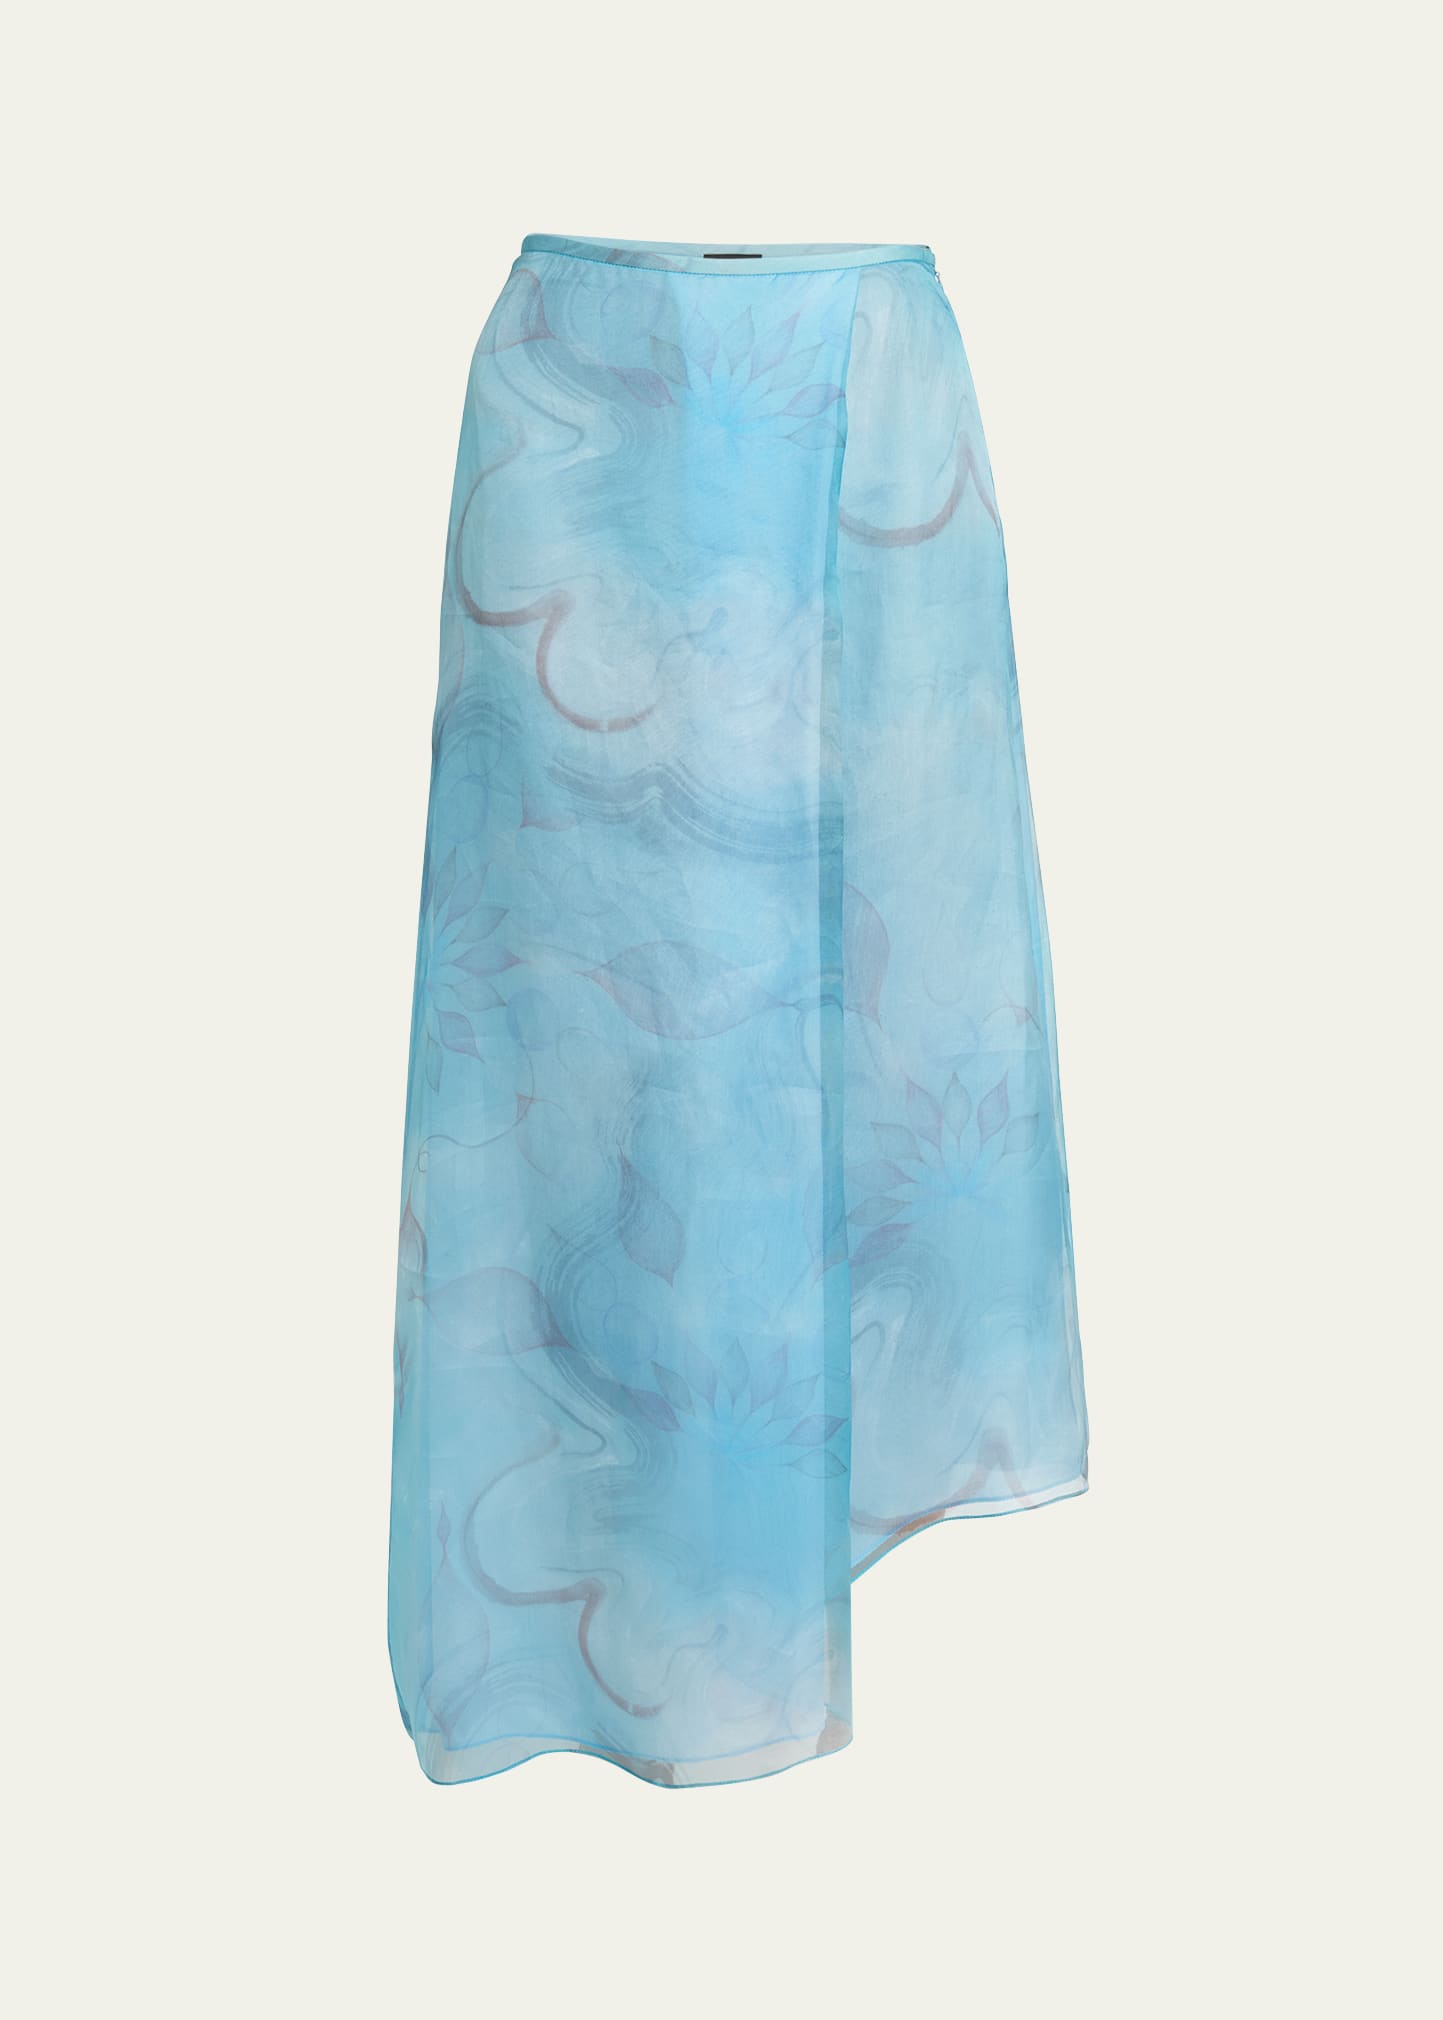 Giorgio Armani Official Store Silk Organza Asymmetric Skirt With A Floral Print In Pattern